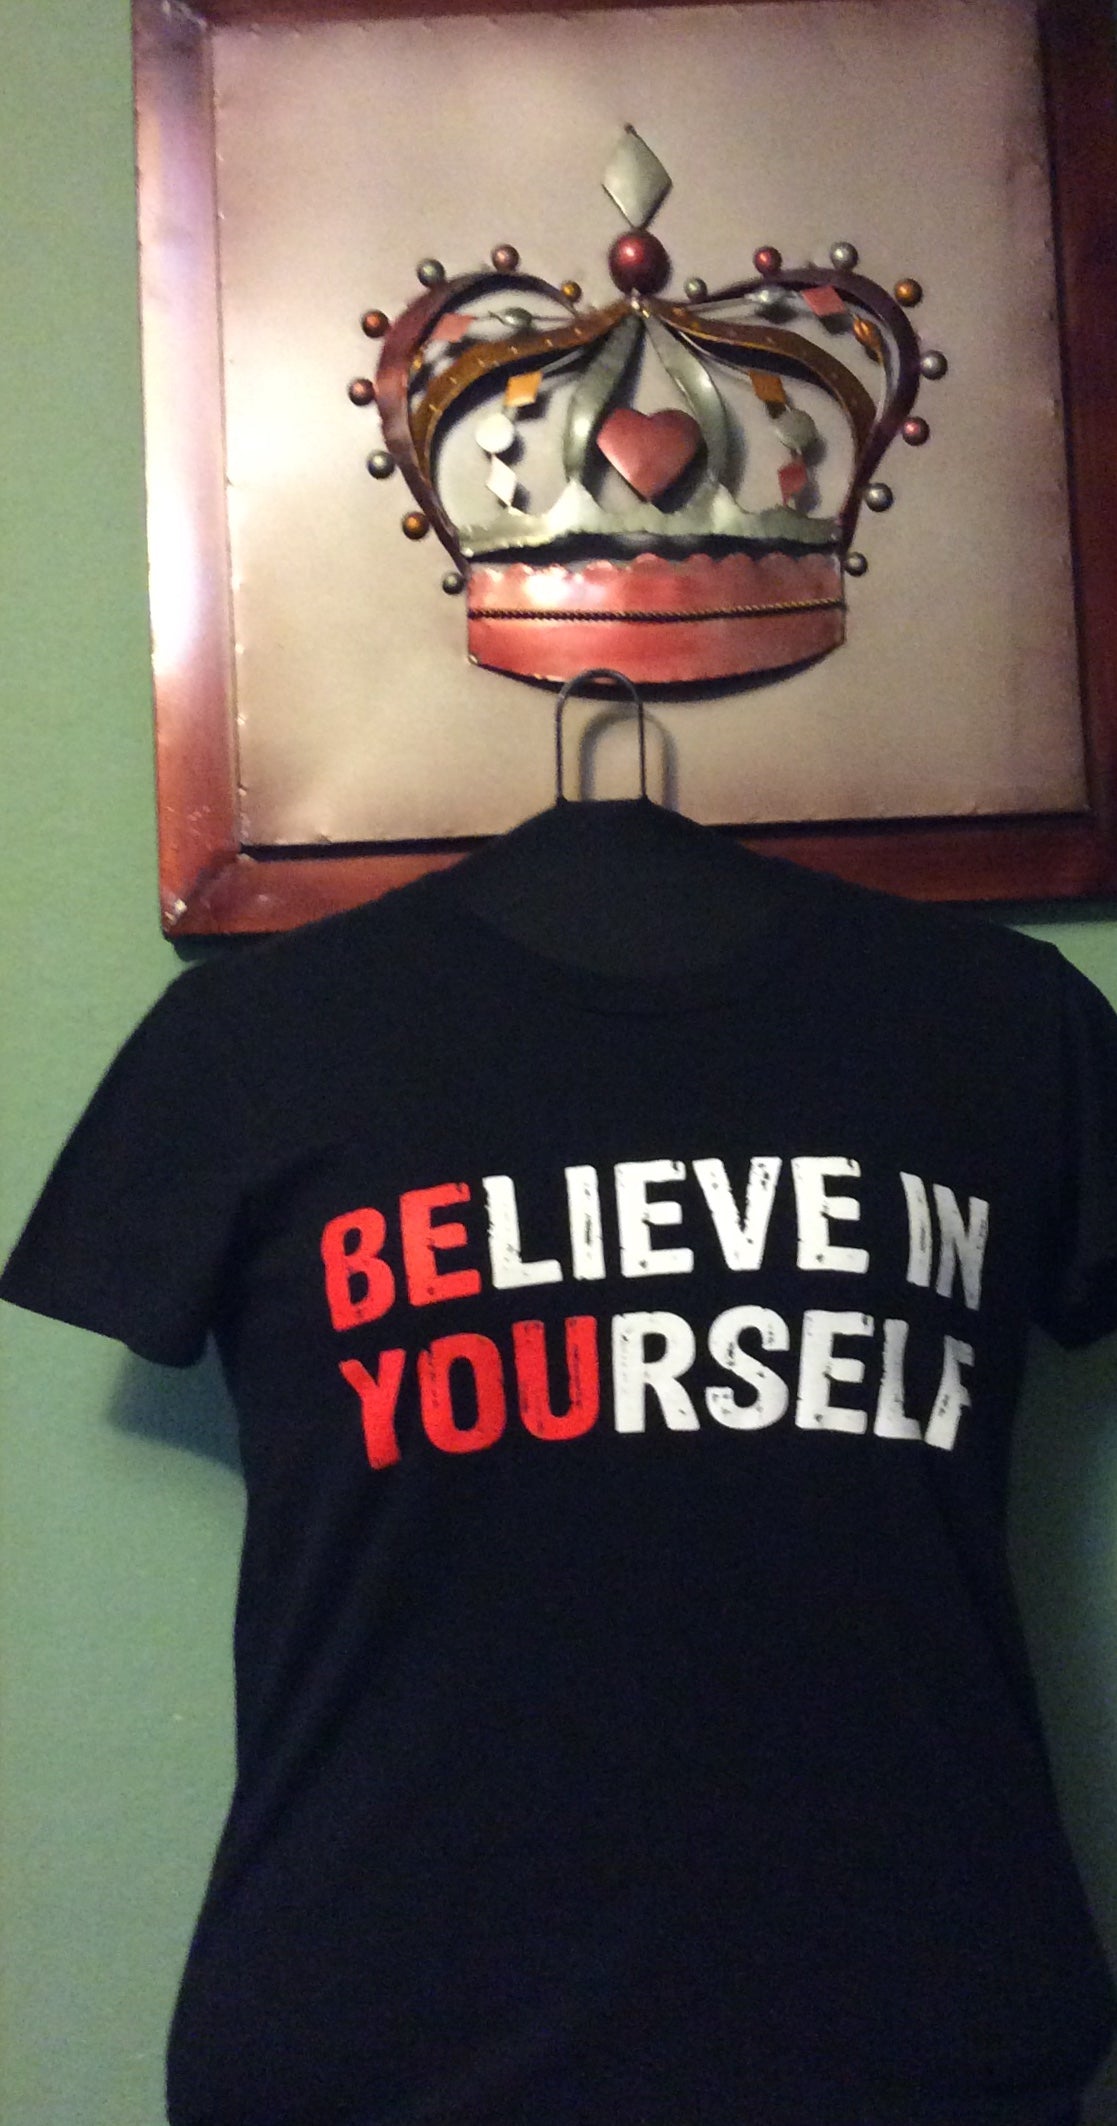 Believe In Yourself - Ladies Tee - Sticks and Stones Tees & More